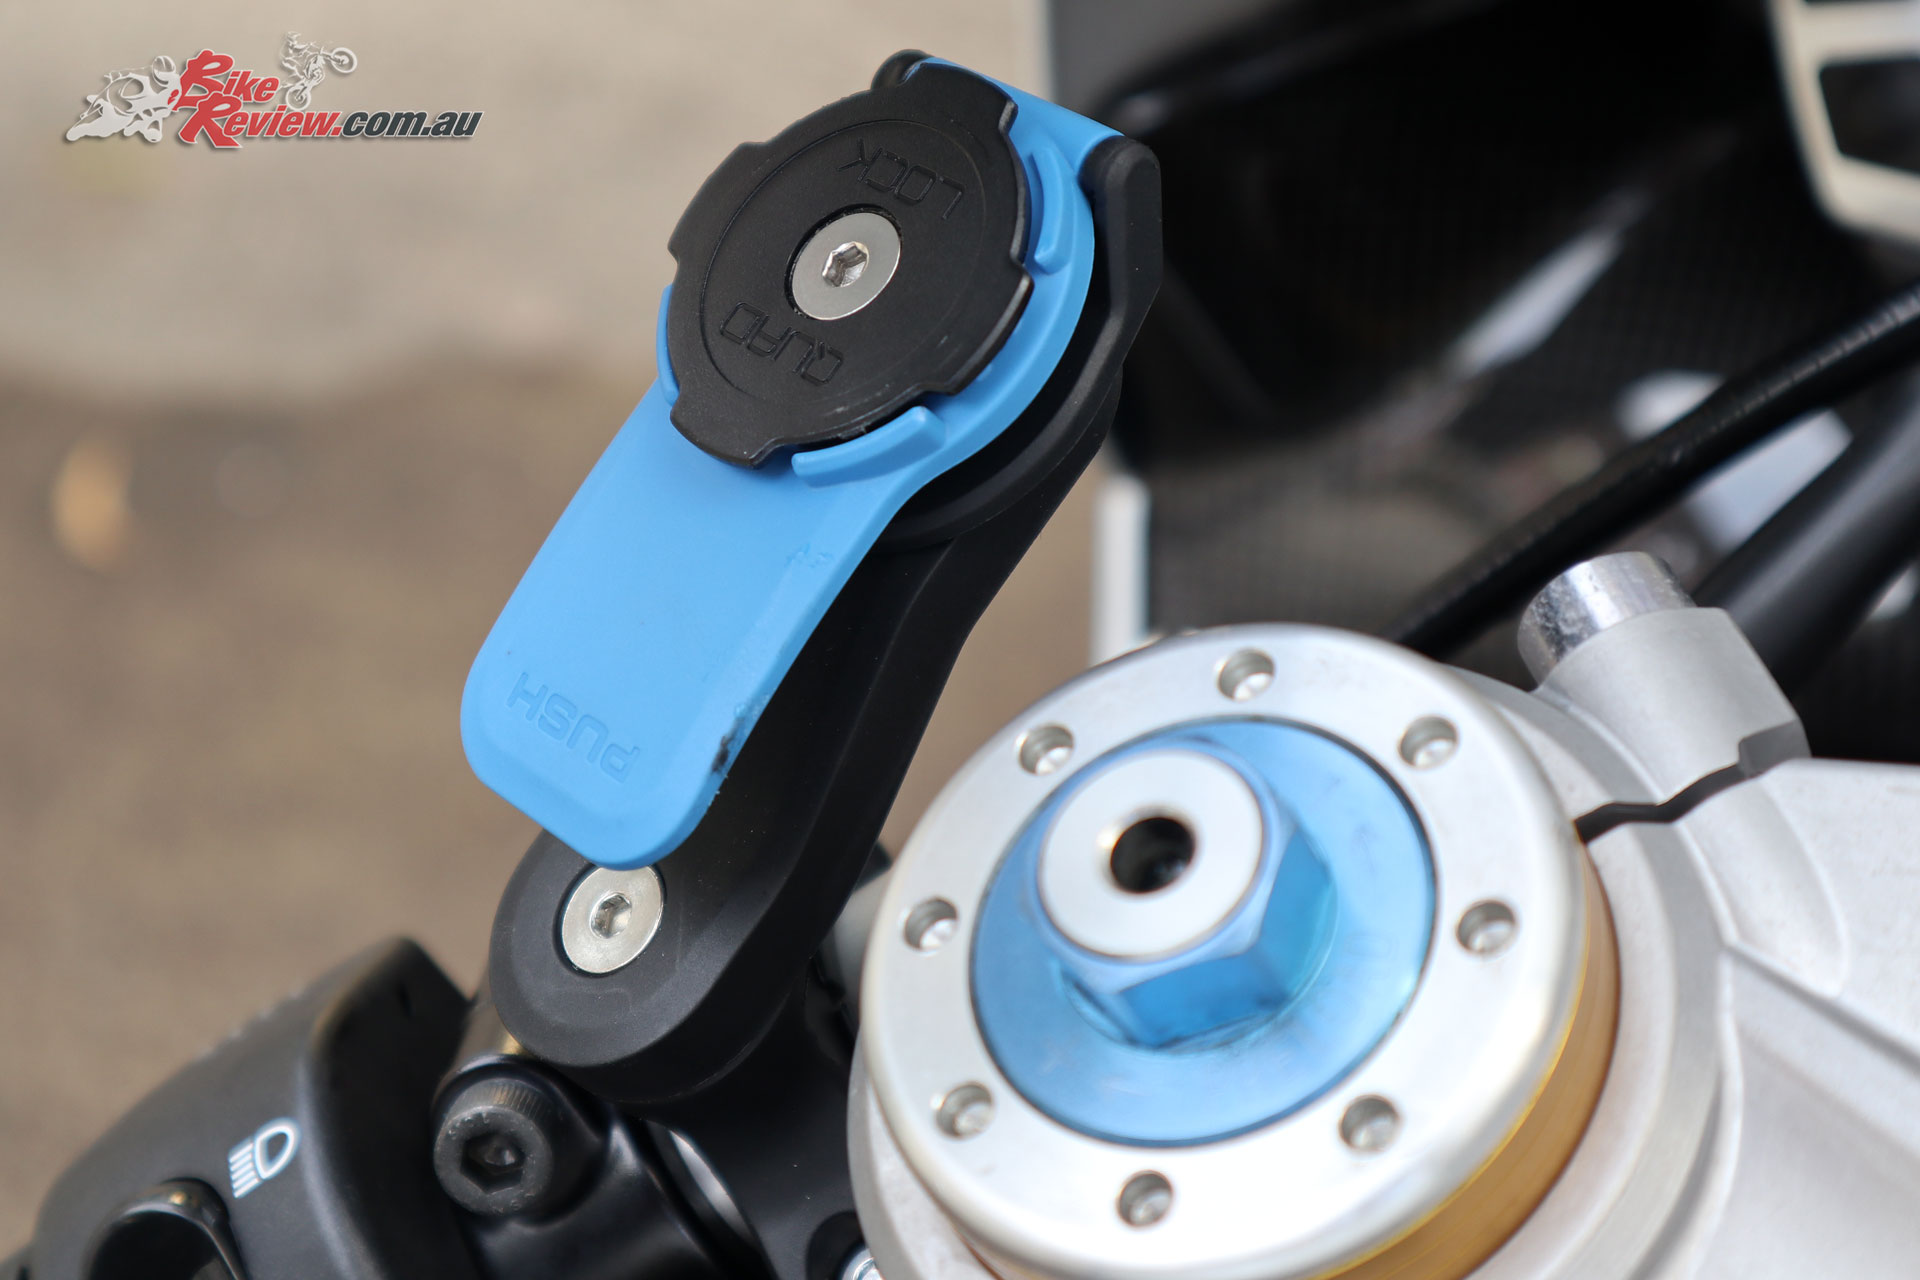 Quad Lock system review: best phone mount for your bike or car